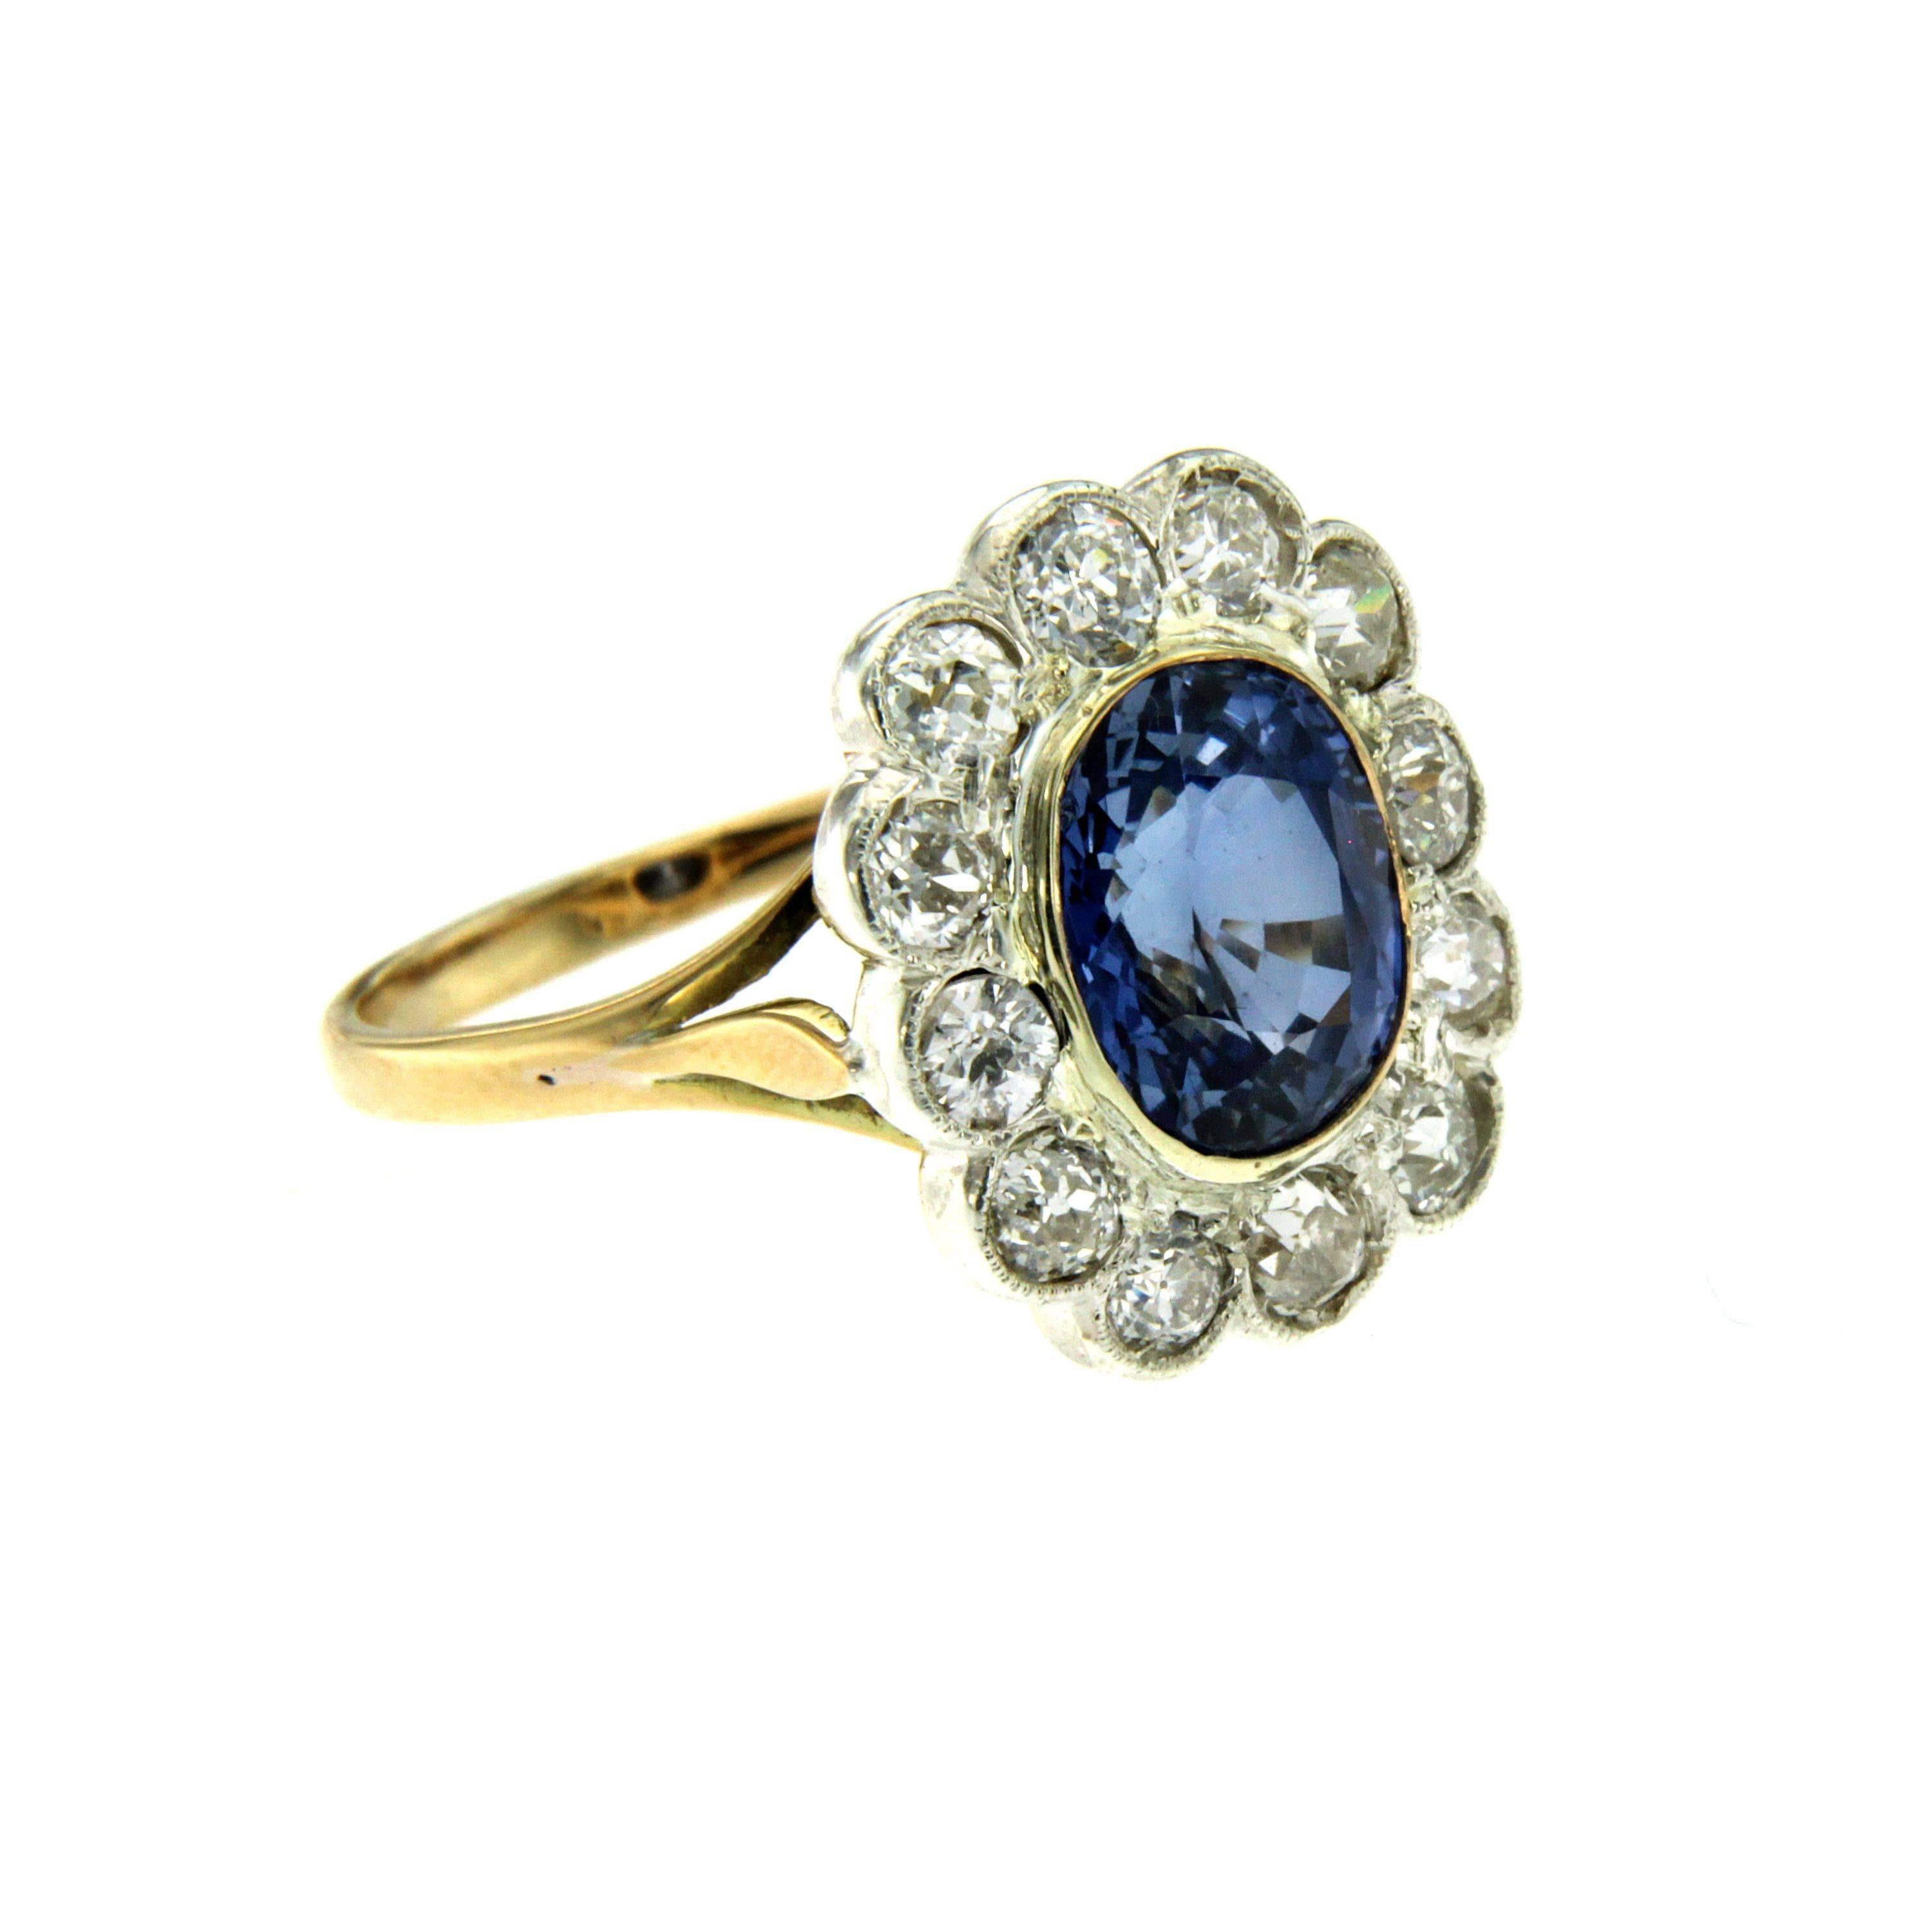 Beautiful 18k cluster ring from 1930, set around with 1,50 carat of sparkling old mine cut Diamonds, graded G/H color Vs and in the center one wide verneuil synthetic corundum weighing 5.00 cts.
This ring is designed and crafted entirely by hand in